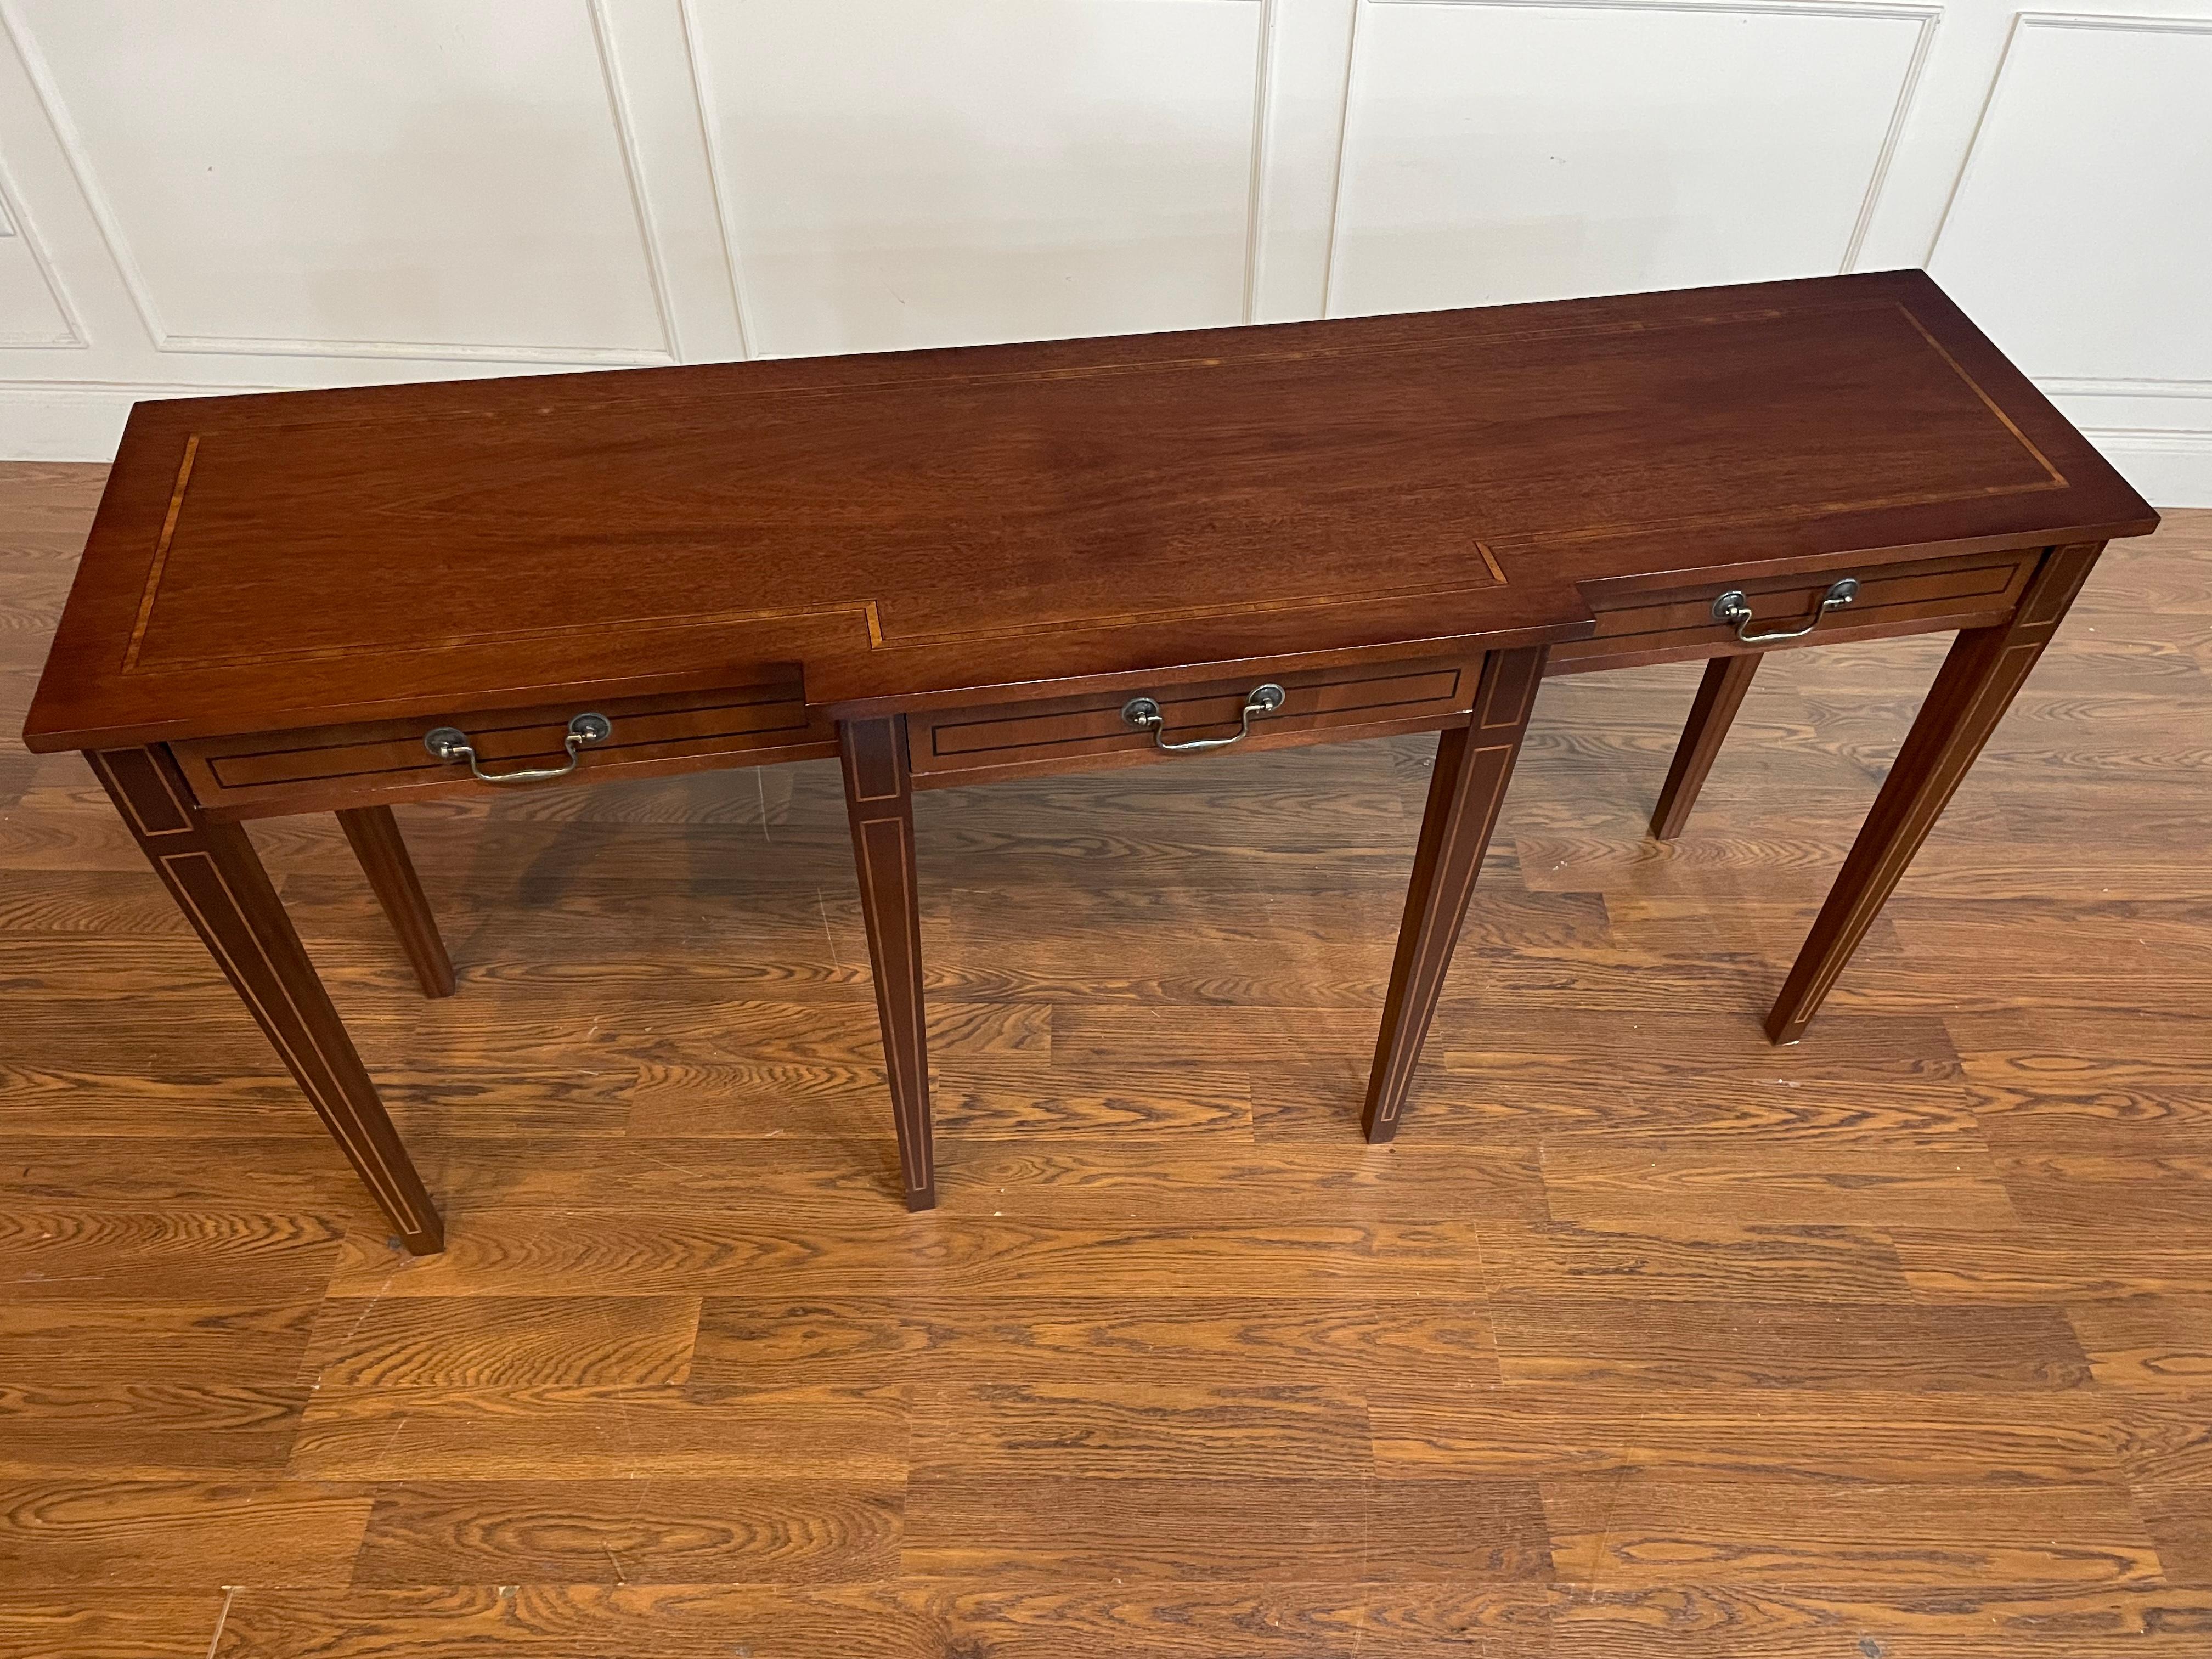 This is our Hepplewhite style mahogany console table. It features classic Hepplewhite styling with square tapered and inlaid legs, a cathedral mahogany top with Movingue inlay, inlaid drawer fronts with traditional dovetailed oak drawer boxes and